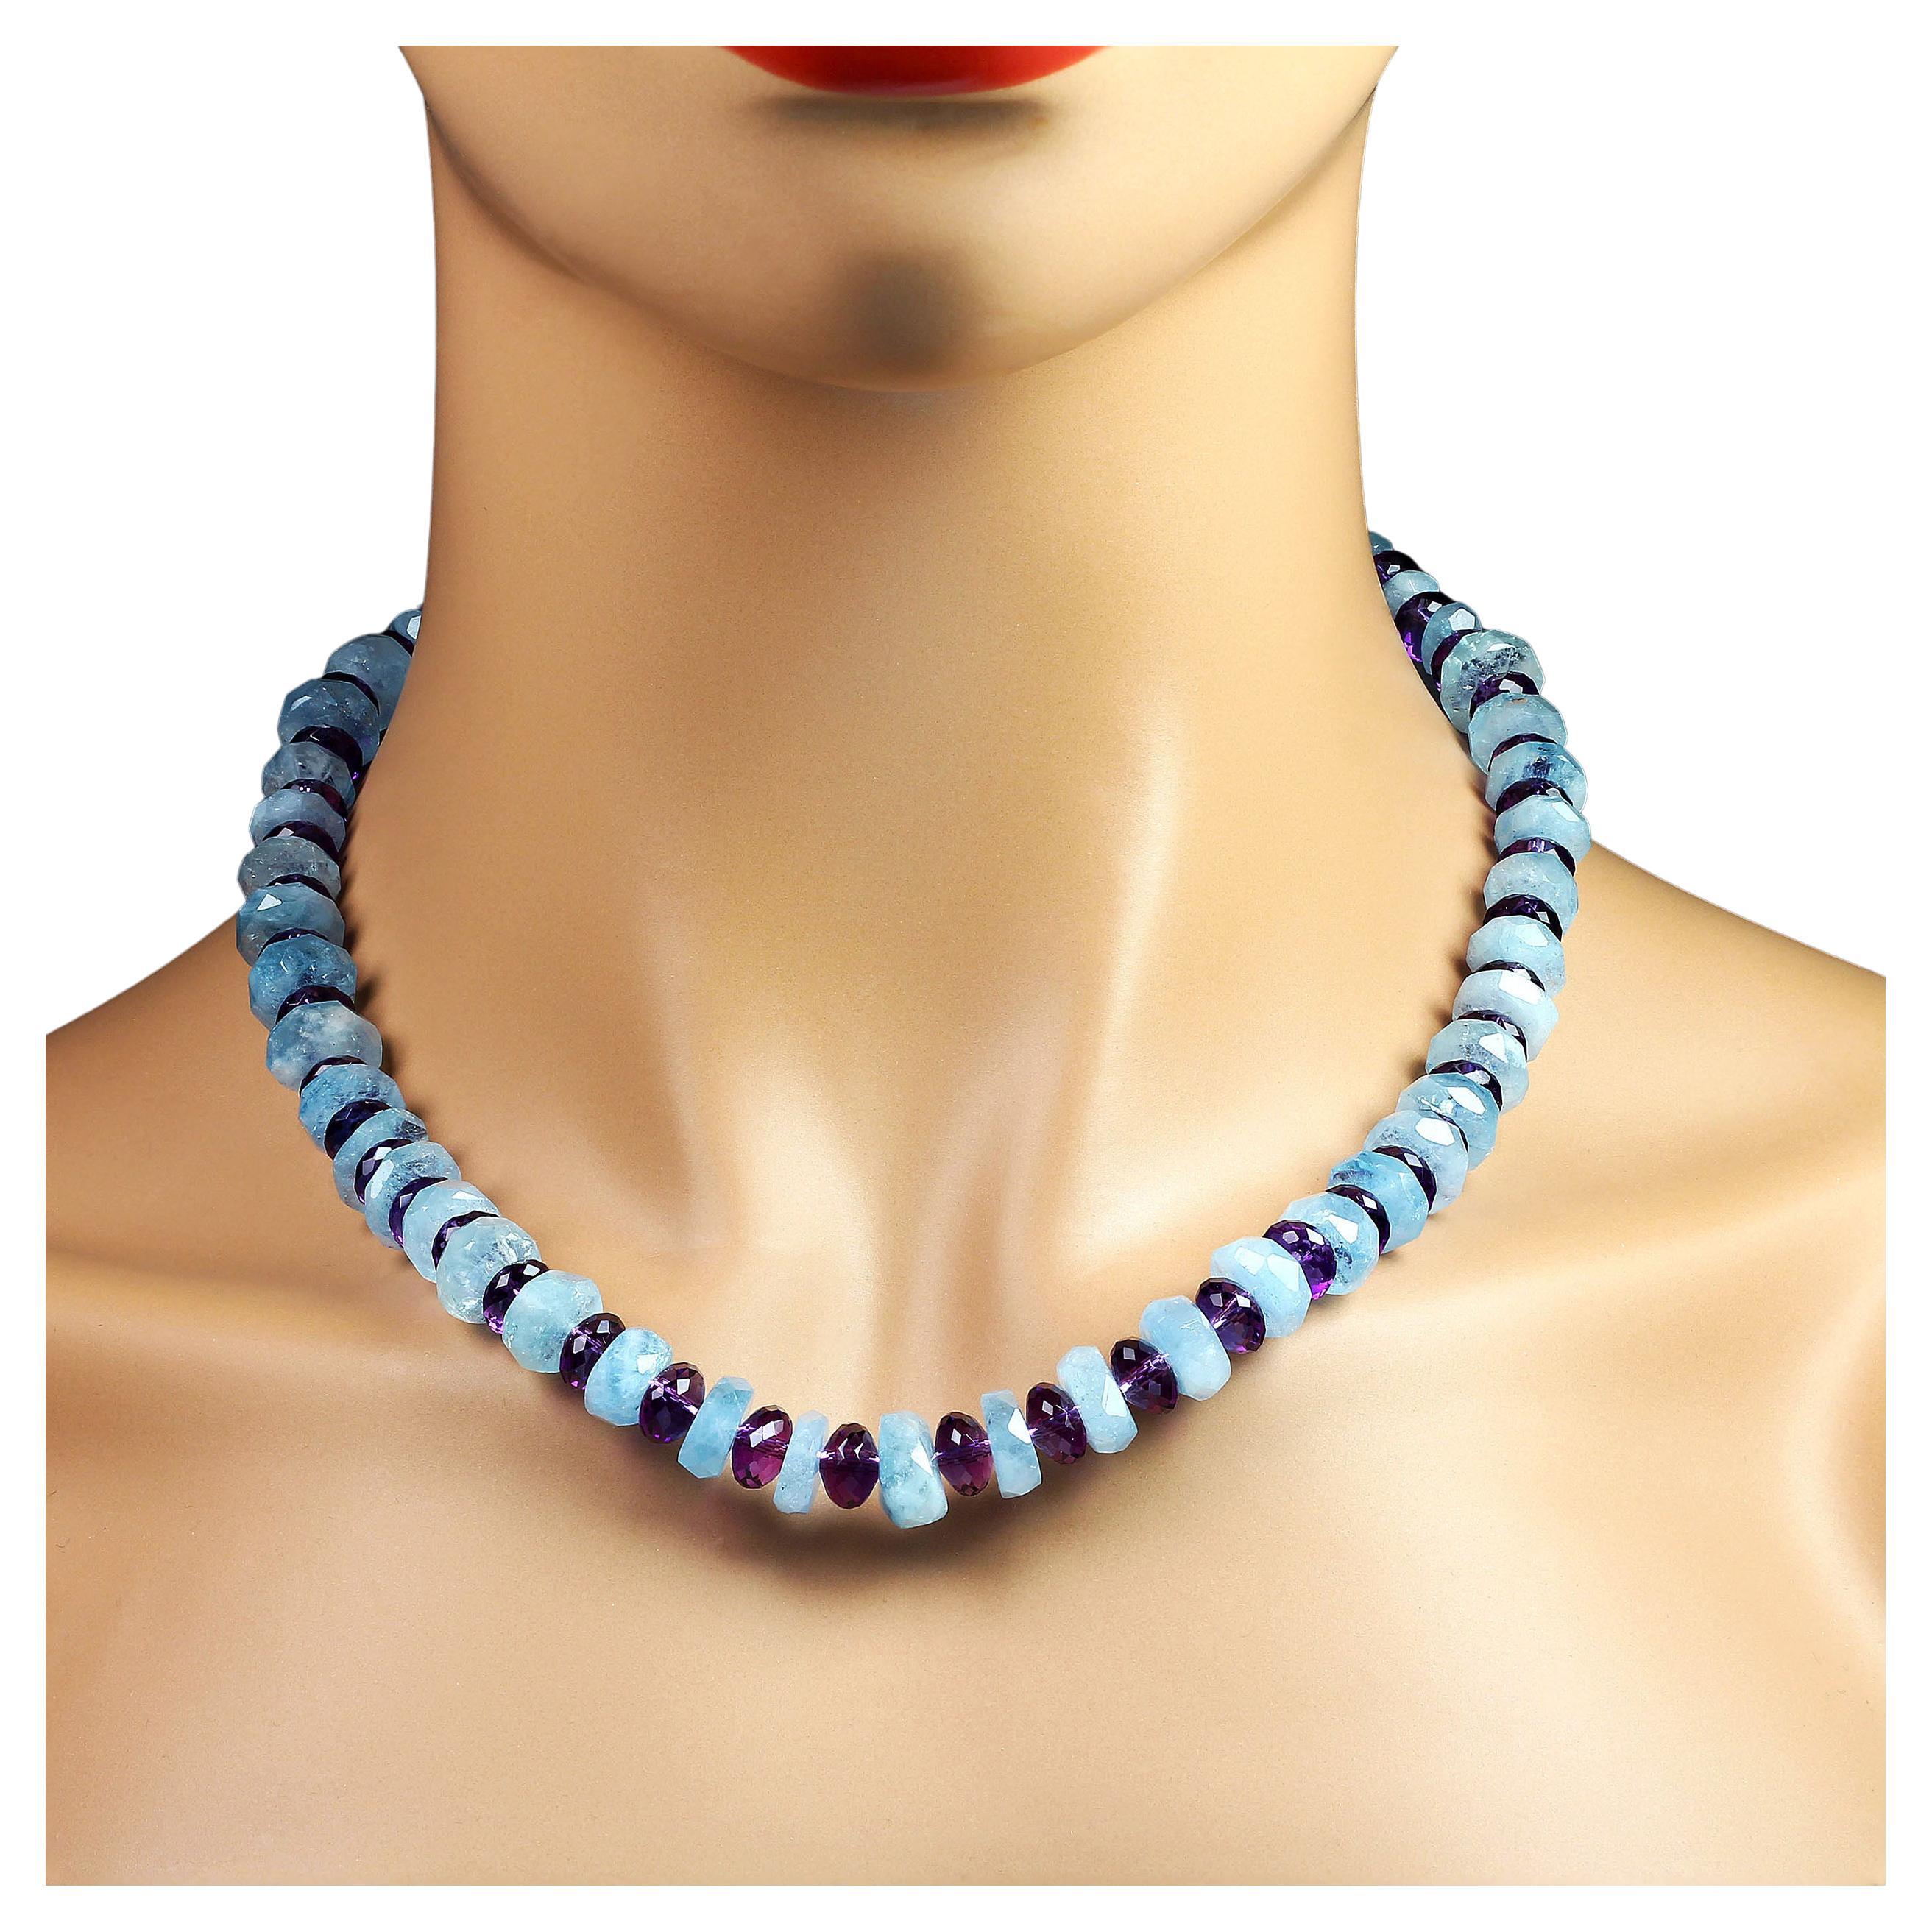 Handmade necklace of lovely medium blue graduated, 10-13 MM, translucent Aquamarine roughly faceted rondelles alternating with sparkling faceted Amethyst, 8 MM, and secured with a Sterling Silver hook. The blue Aquamarine and purple Amethyst play